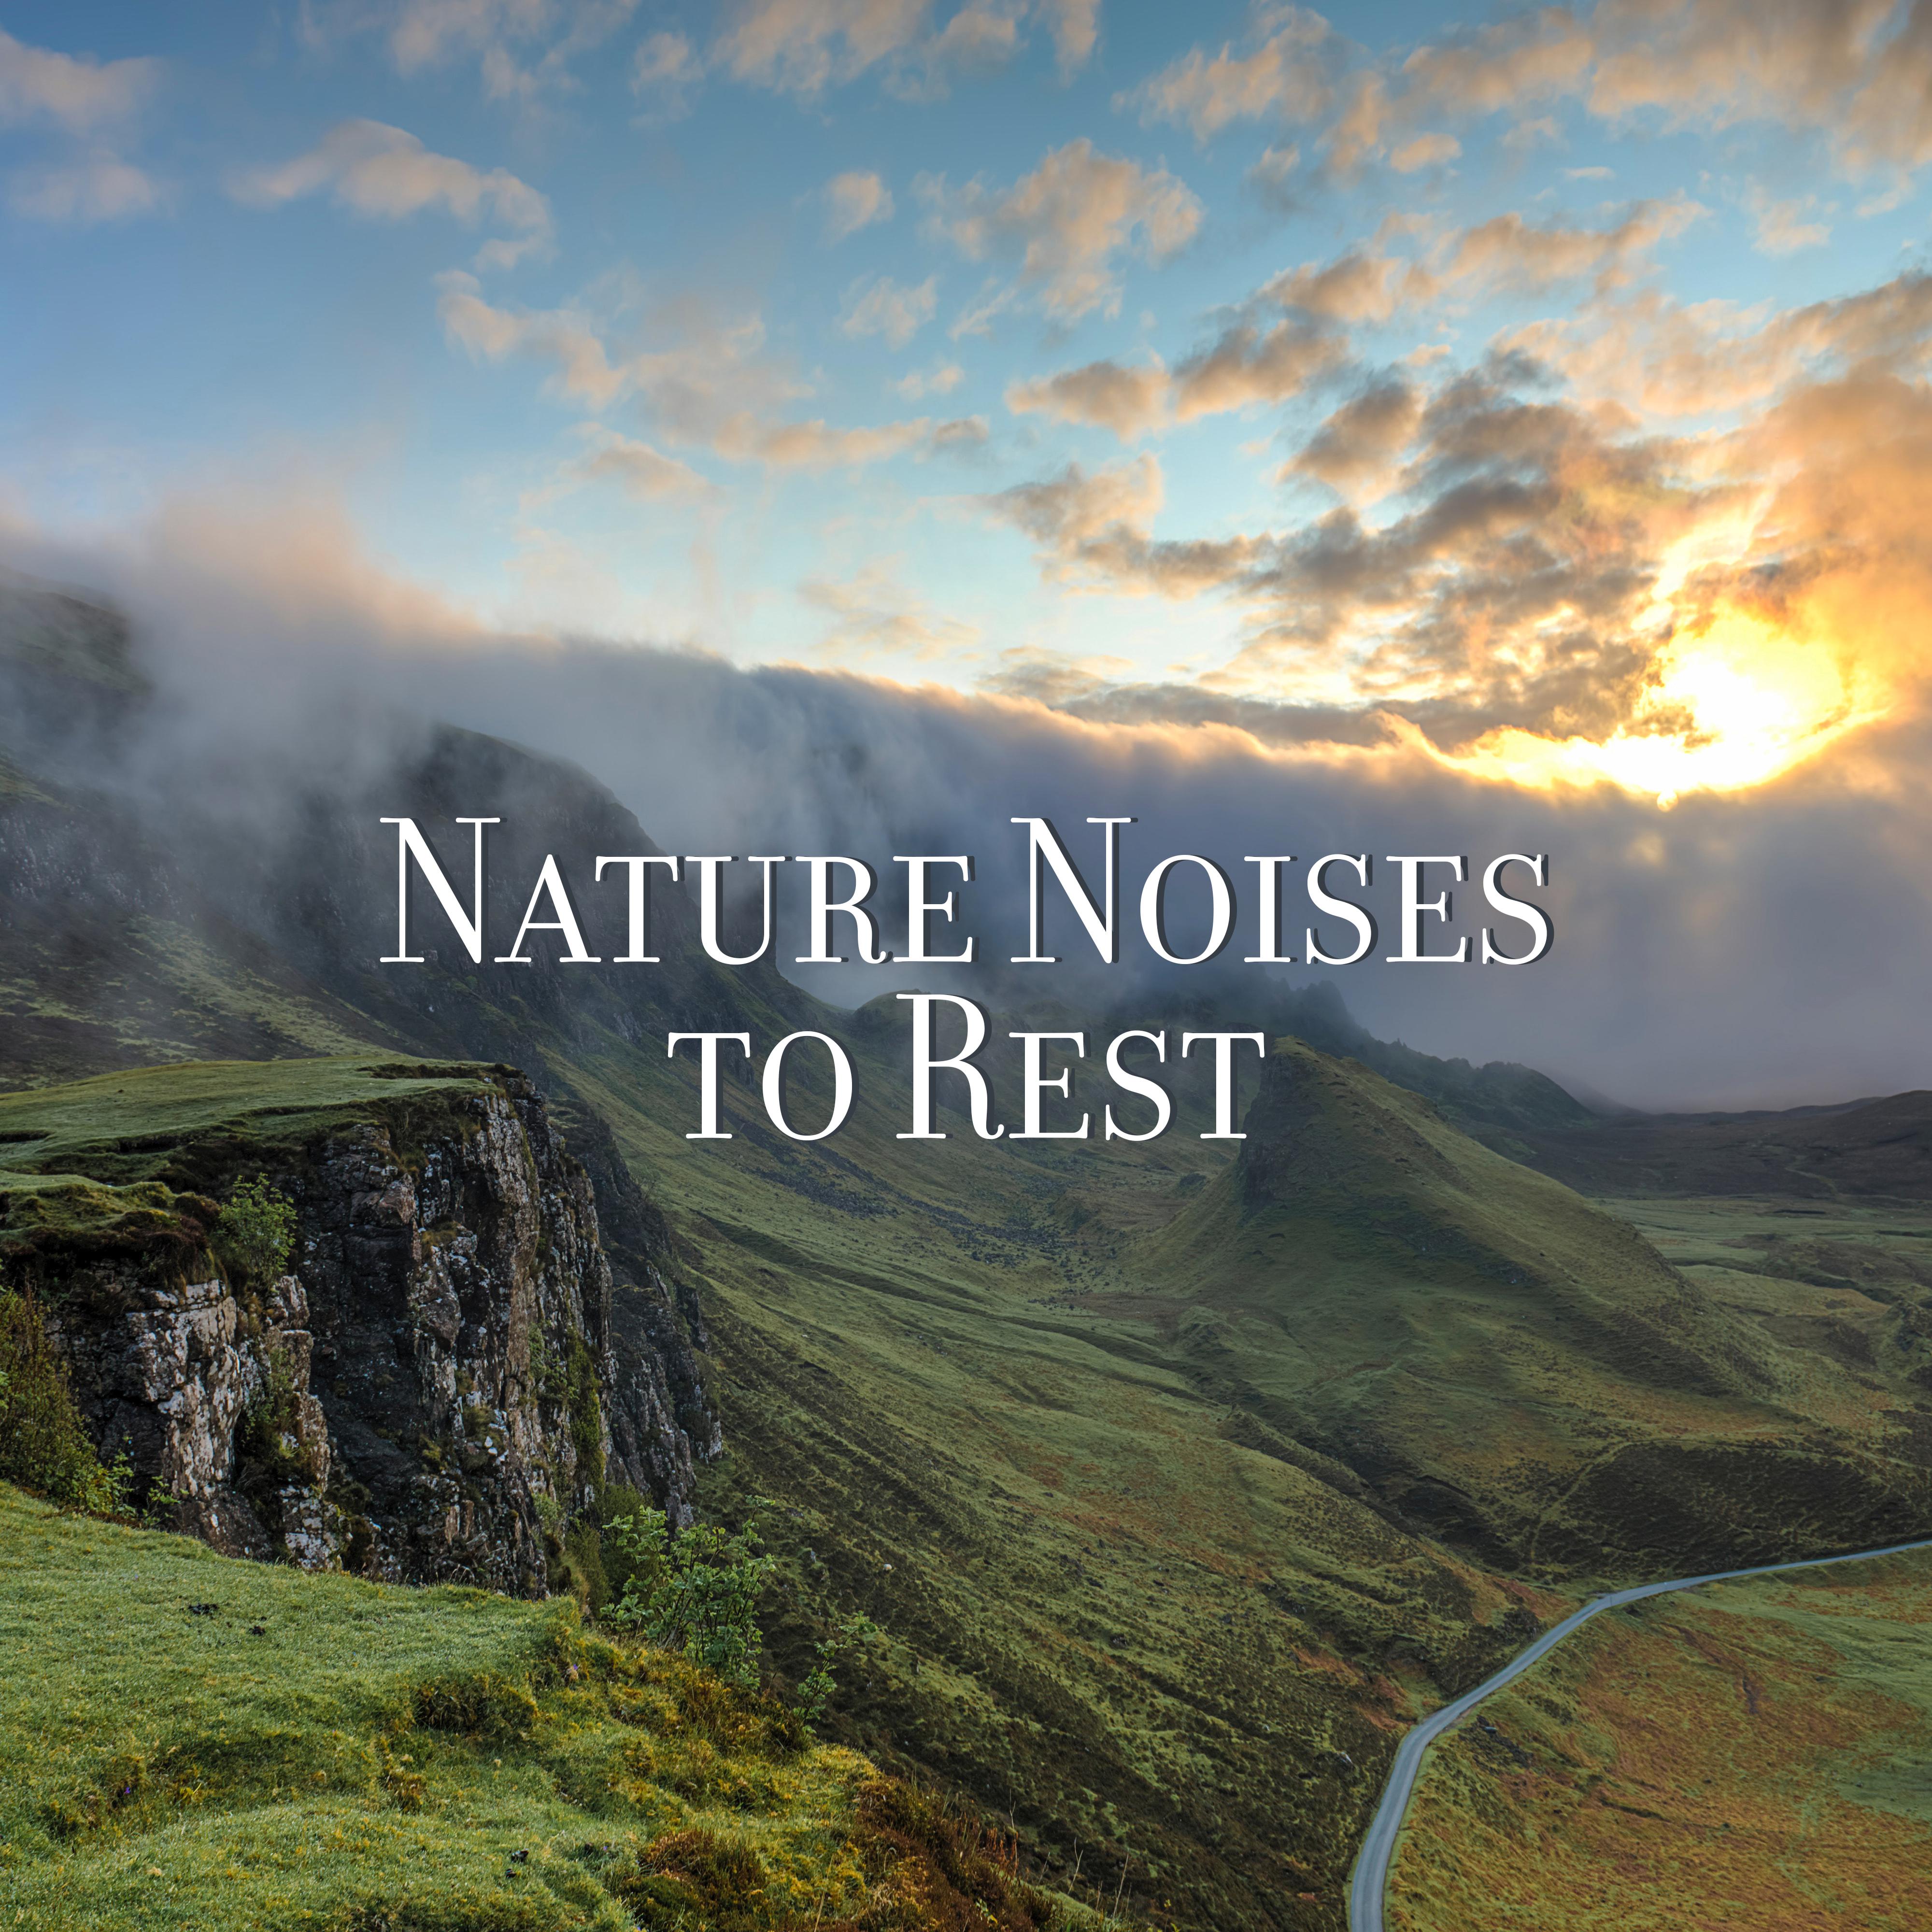 Nature Noises to Rest